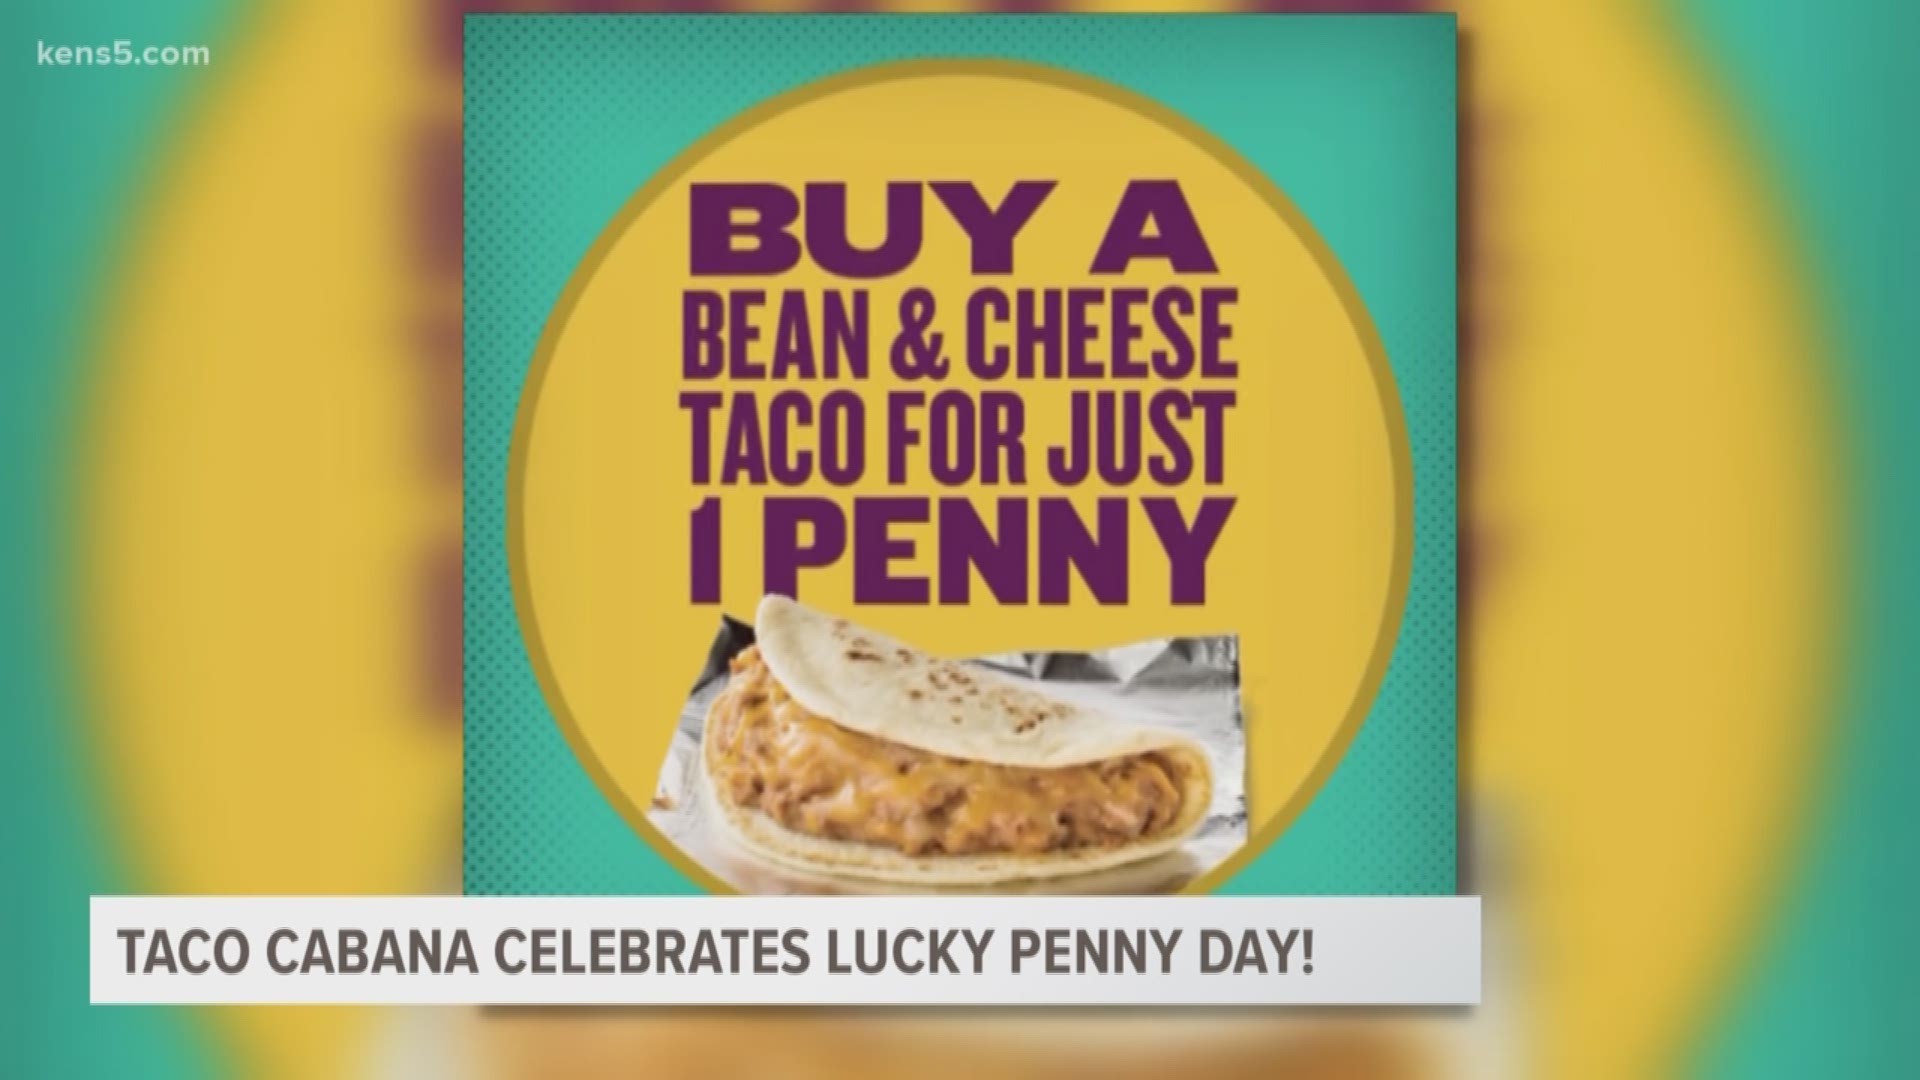 Find a penny, pick it up, and then grab a taco at Taco Cabana on National Lucky Penny Day.